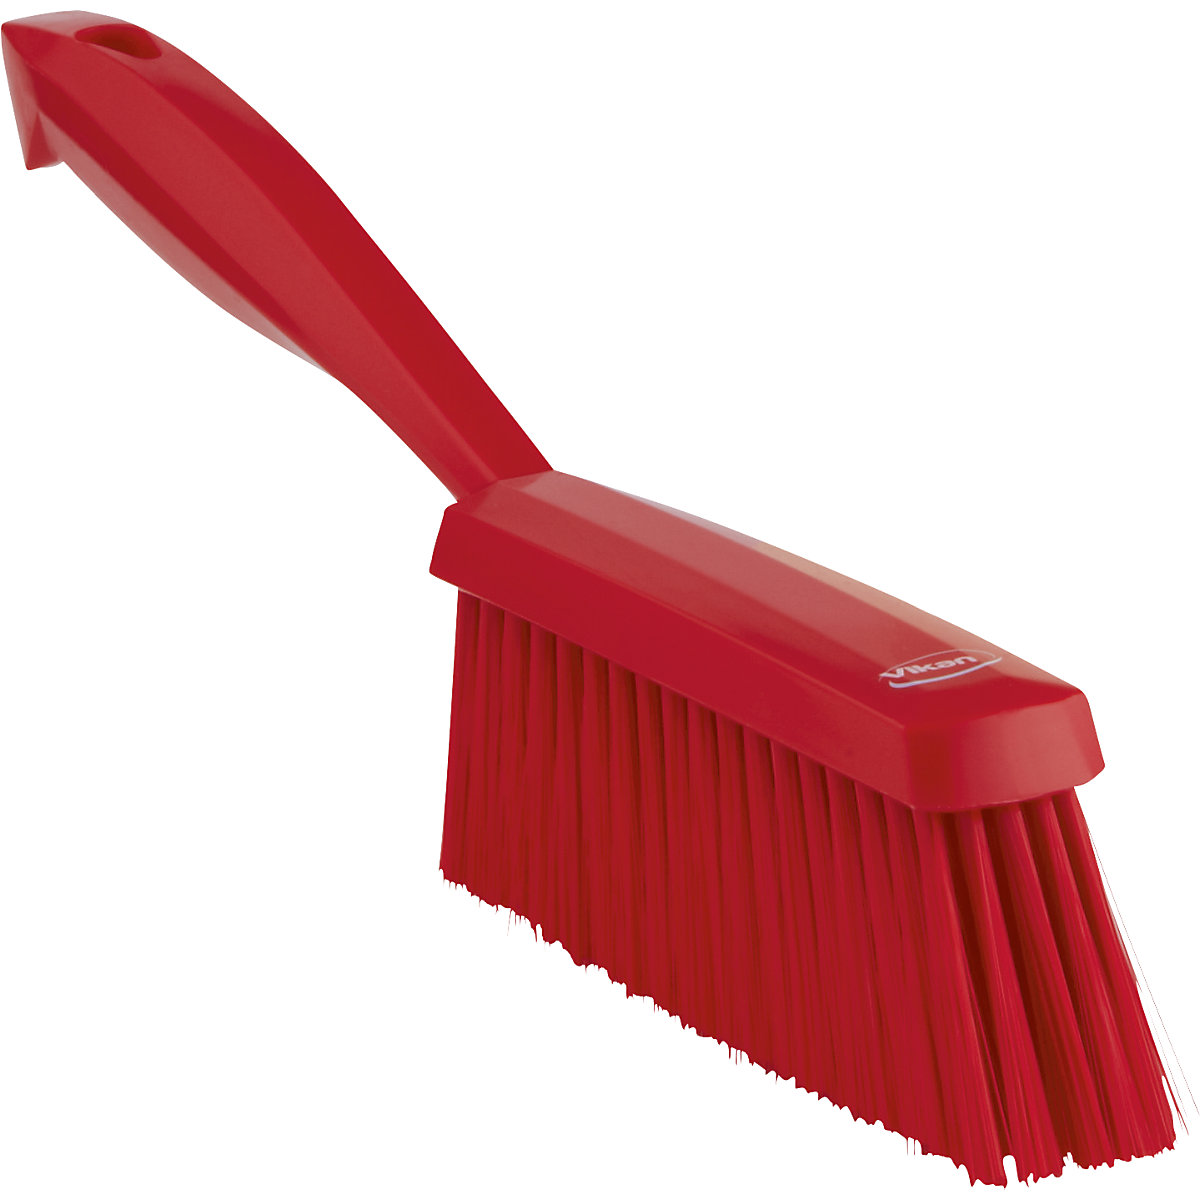 Hand brush, suitable for foodstuffs – Vikan, soft, pack of 15, red-6